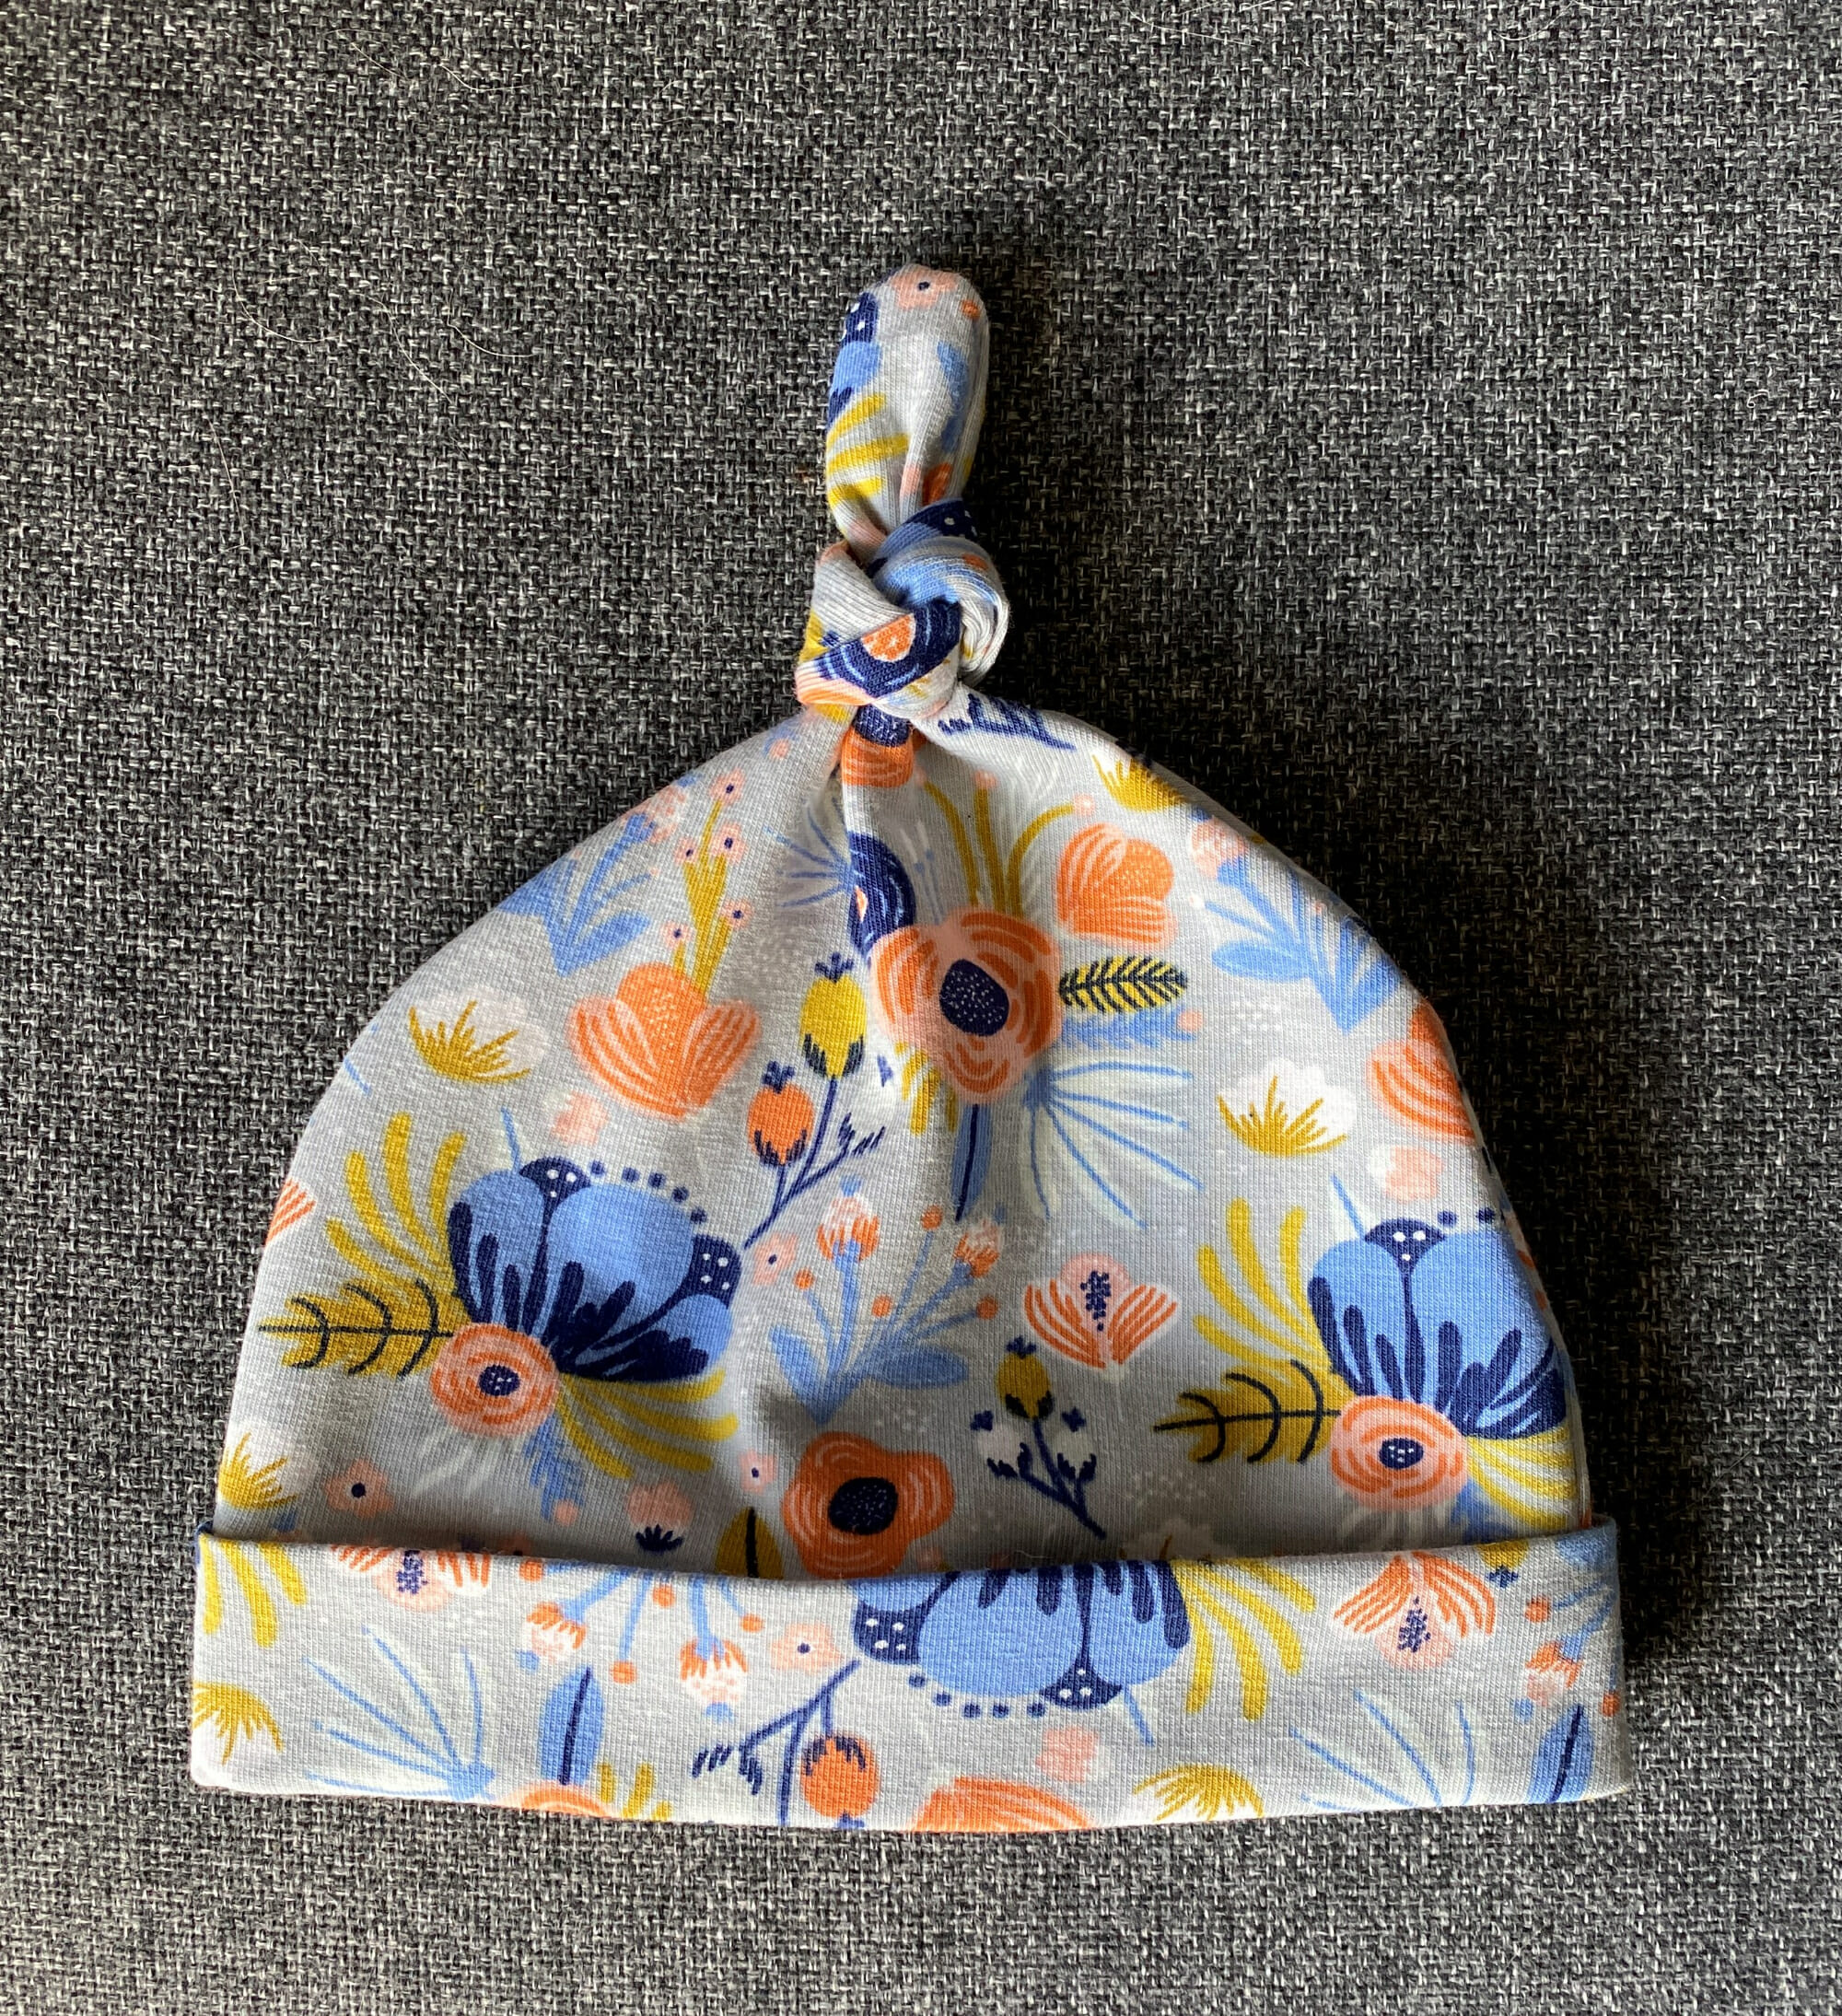 DIY knotted baby hat pattern